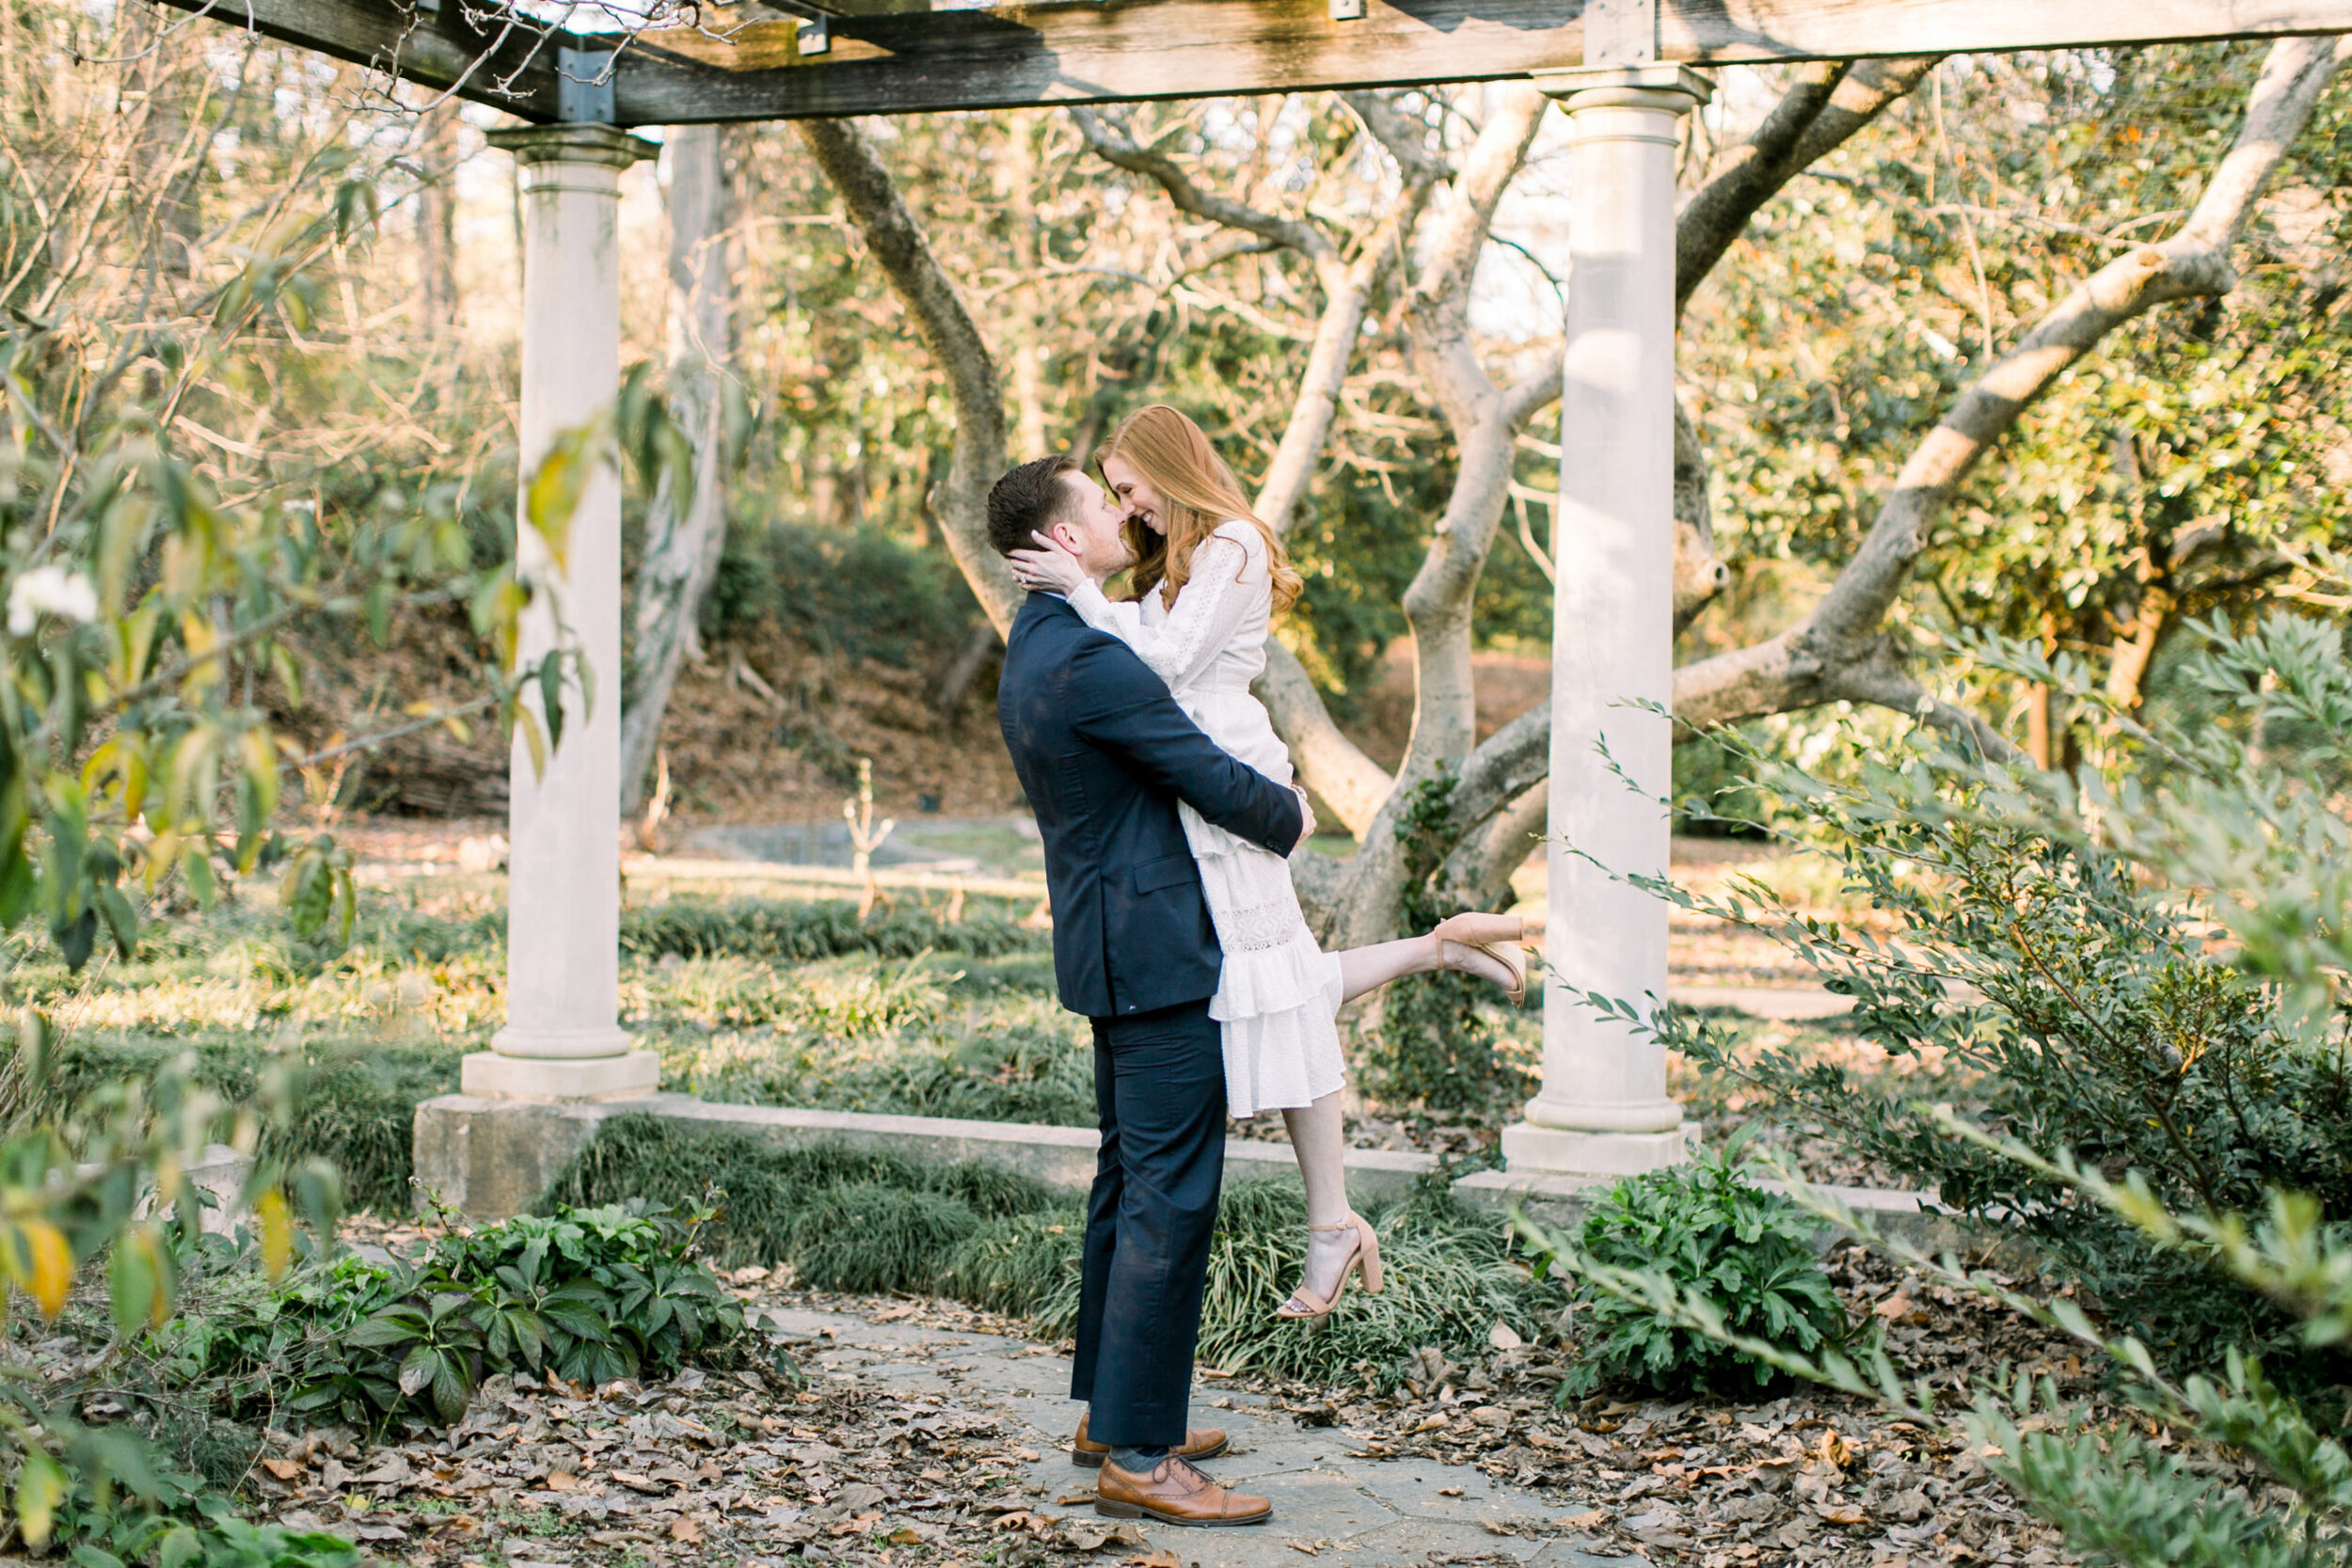 Photo Credit to Macy O’Connell Photography. See her full blogpost here.